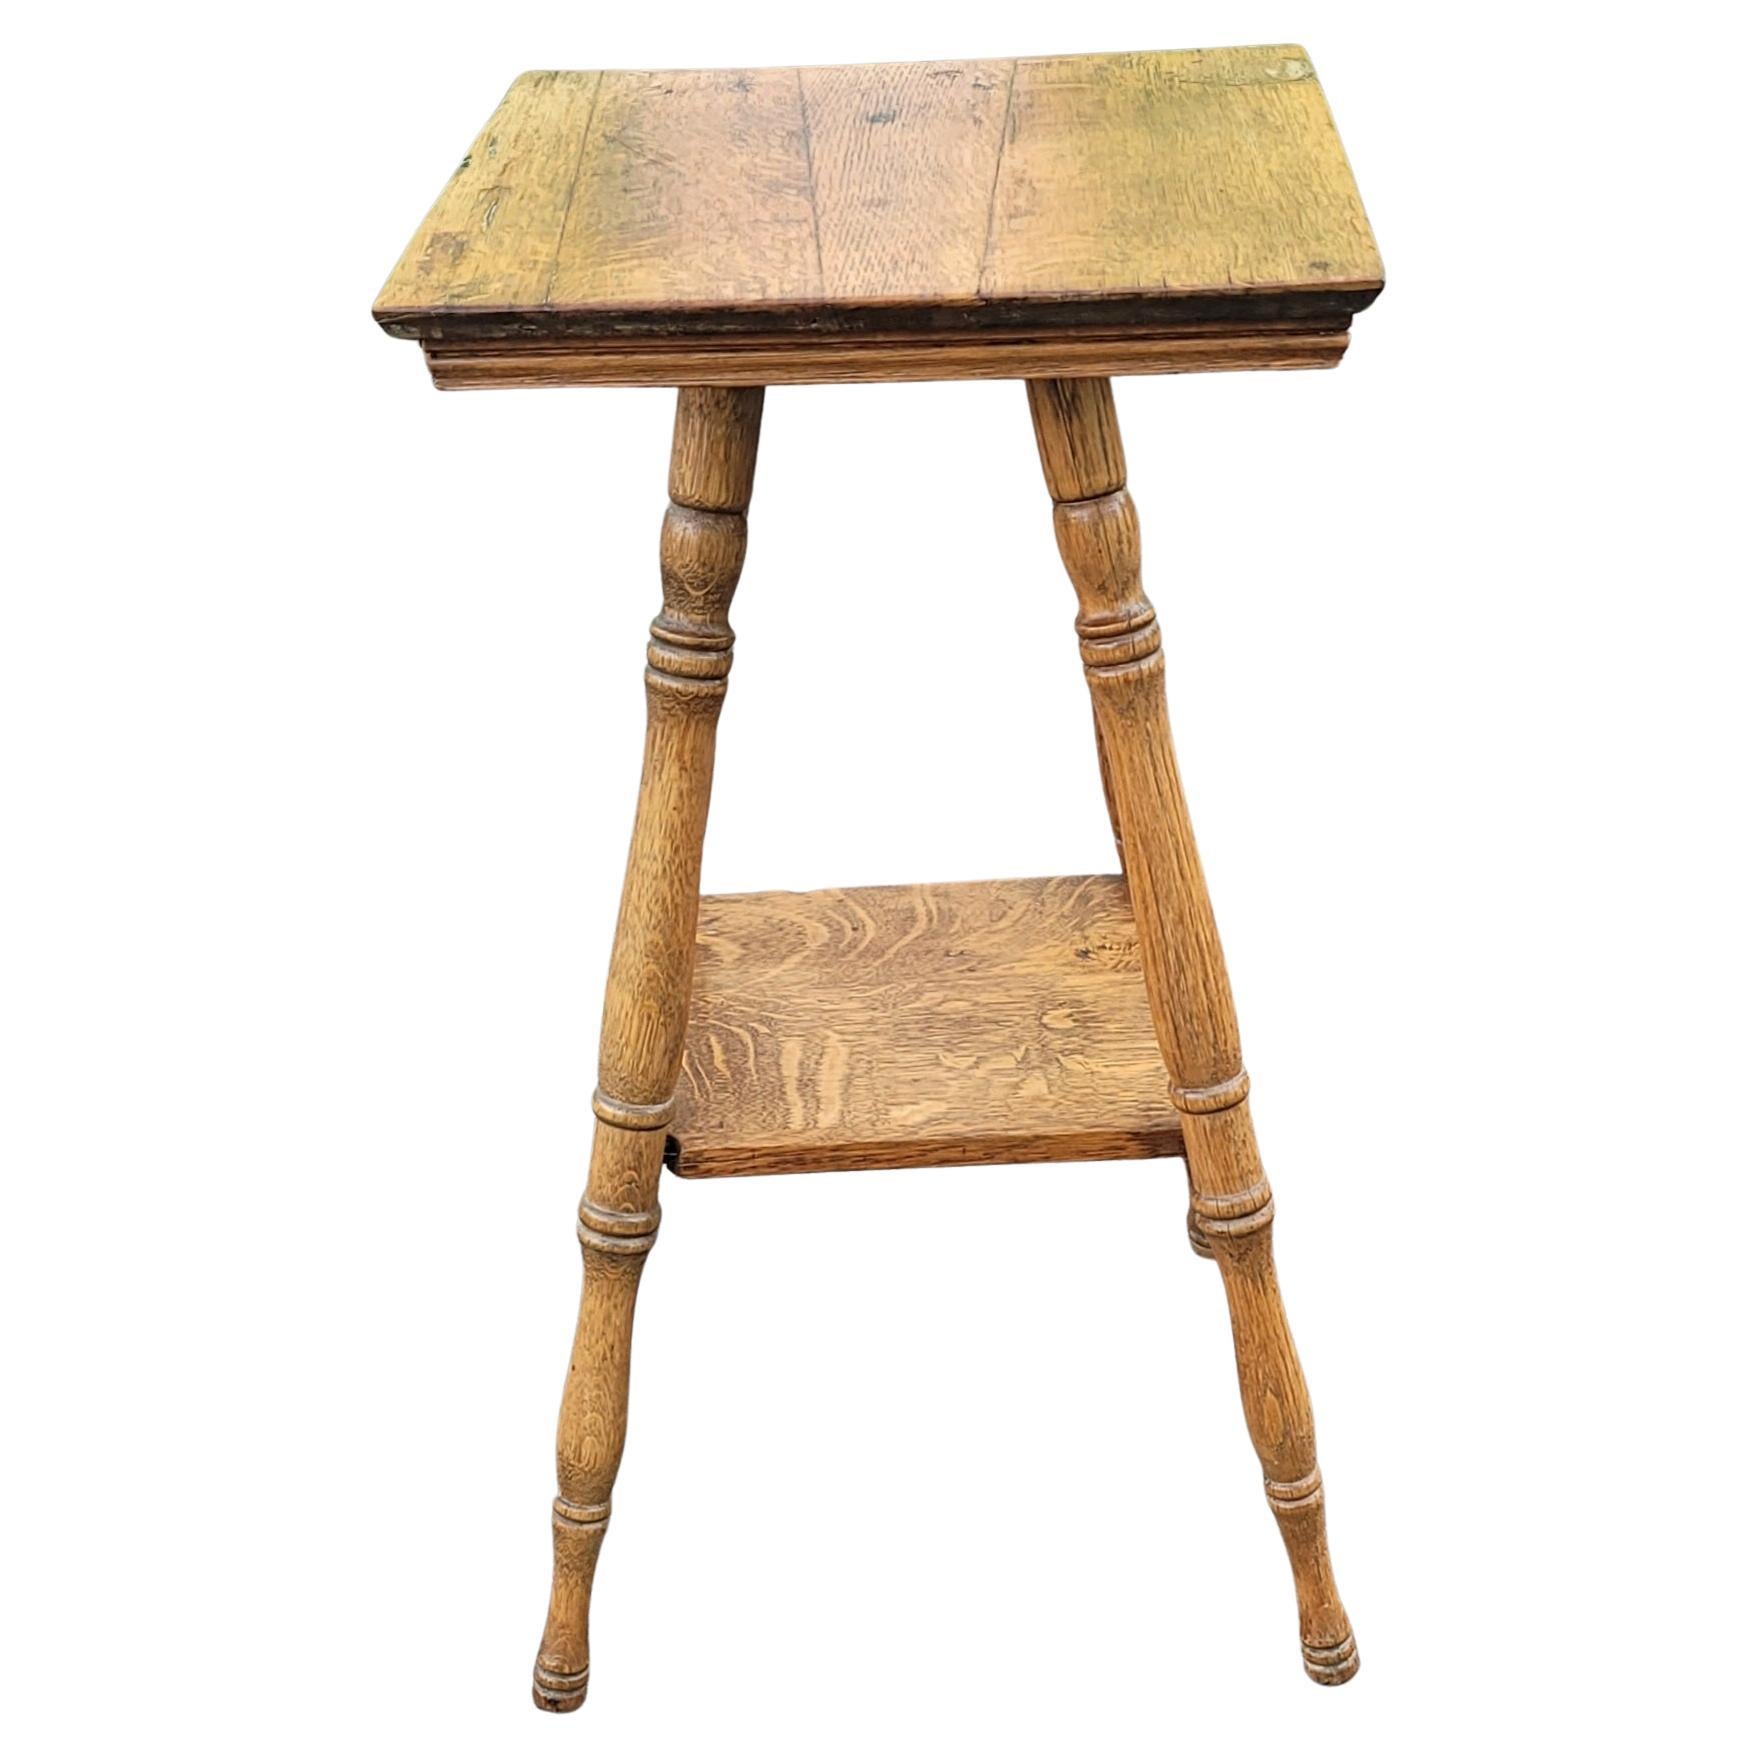 An early 1900s American Classical Oak Parlor Table with Turned Legs. 
Measures 16 inches square and stand 29 inches tall.
